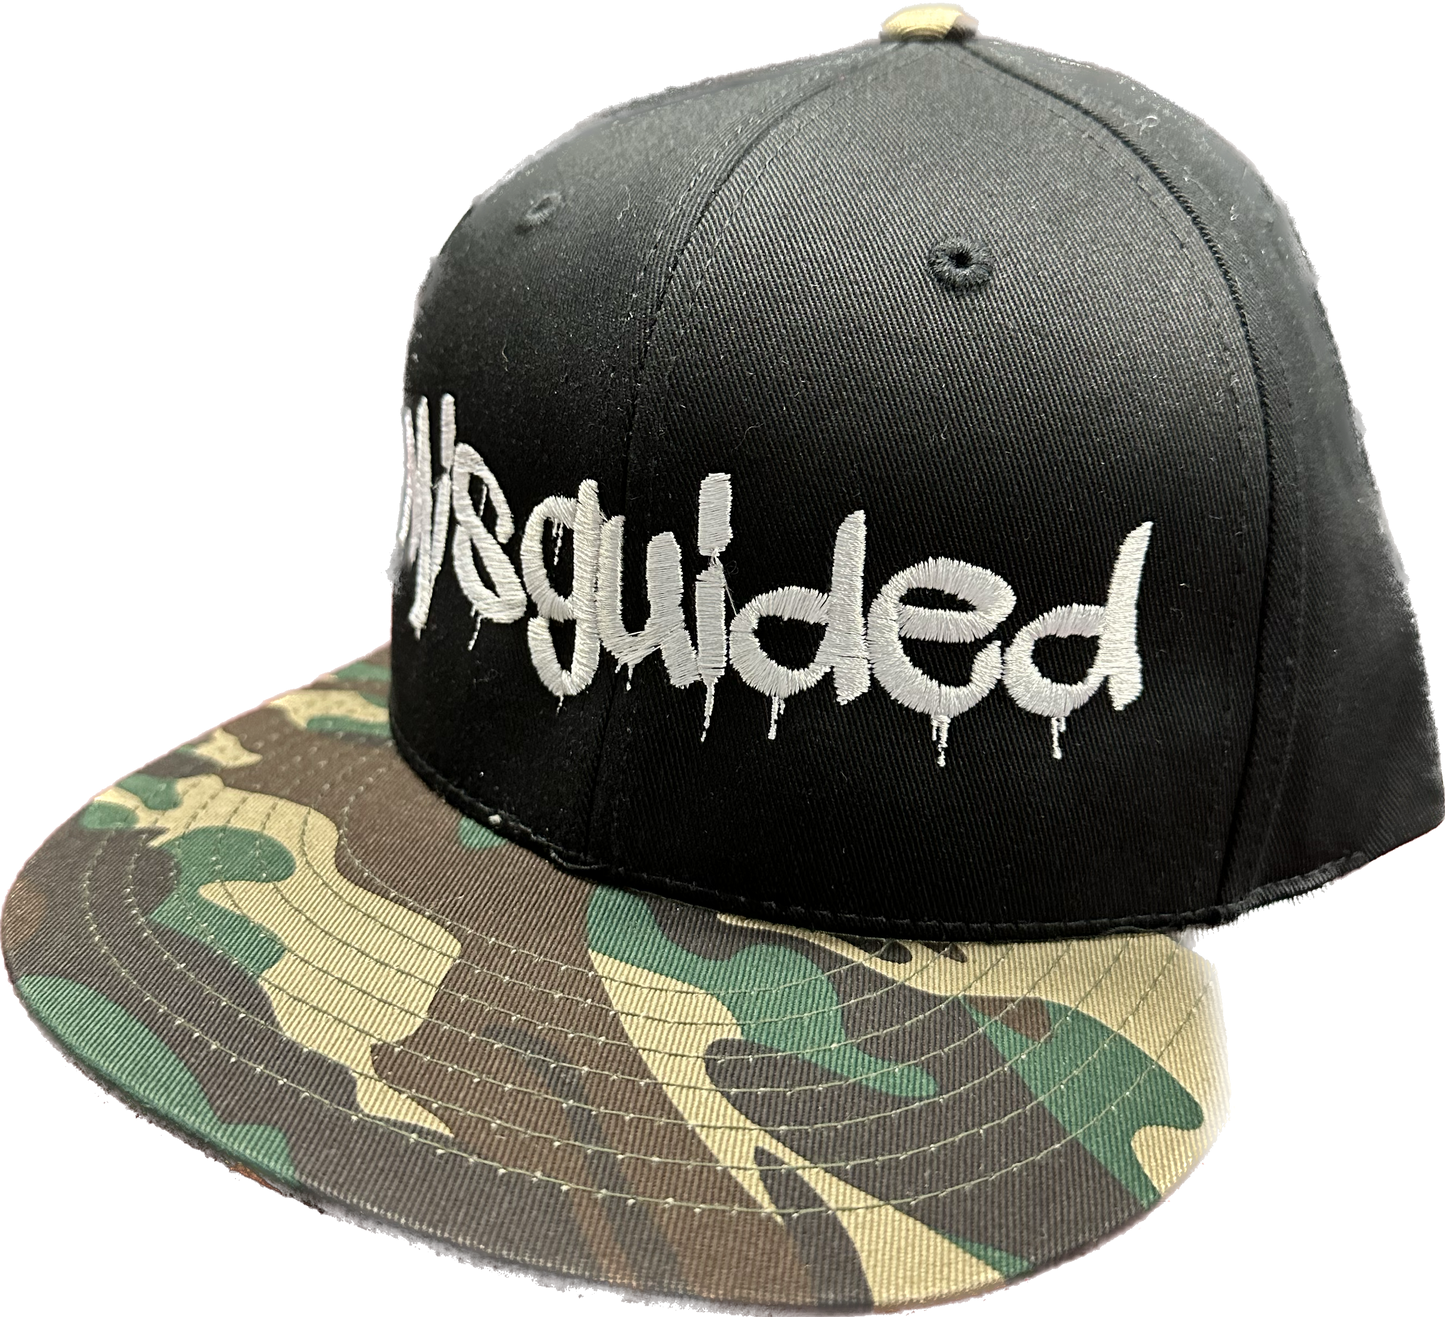 Stealth Camo Misguided Snapback!